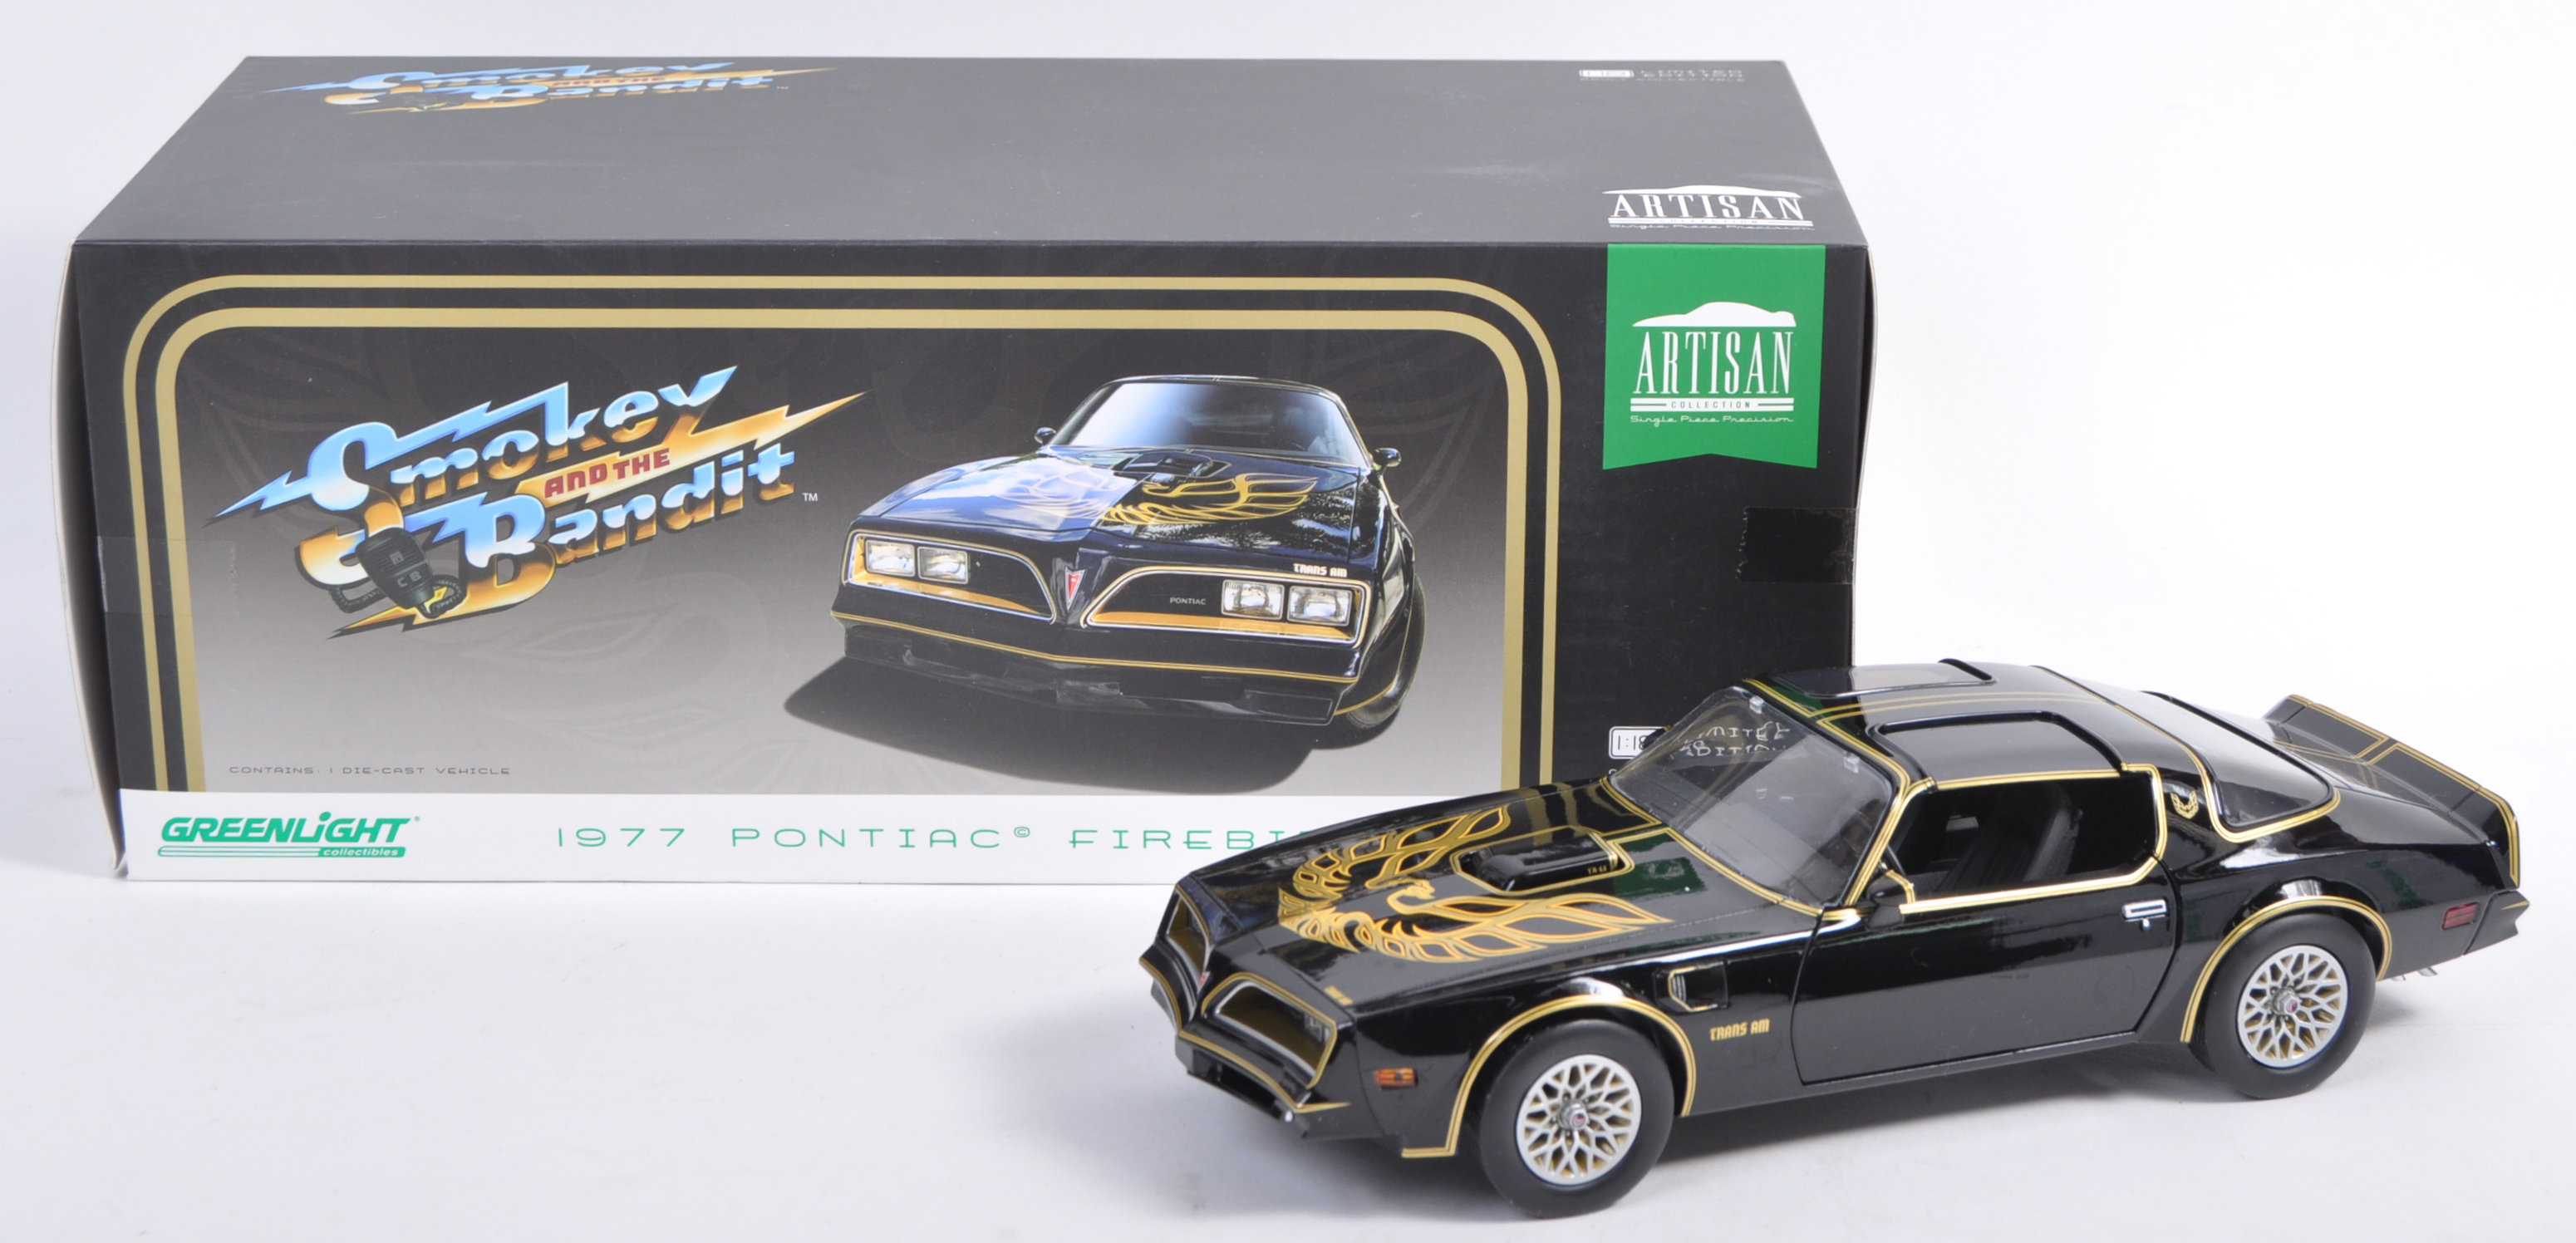 GREENLIGHT COLLECTIBLES 1/8 SCALE SMOKEY & THE BANDIT DIECAST